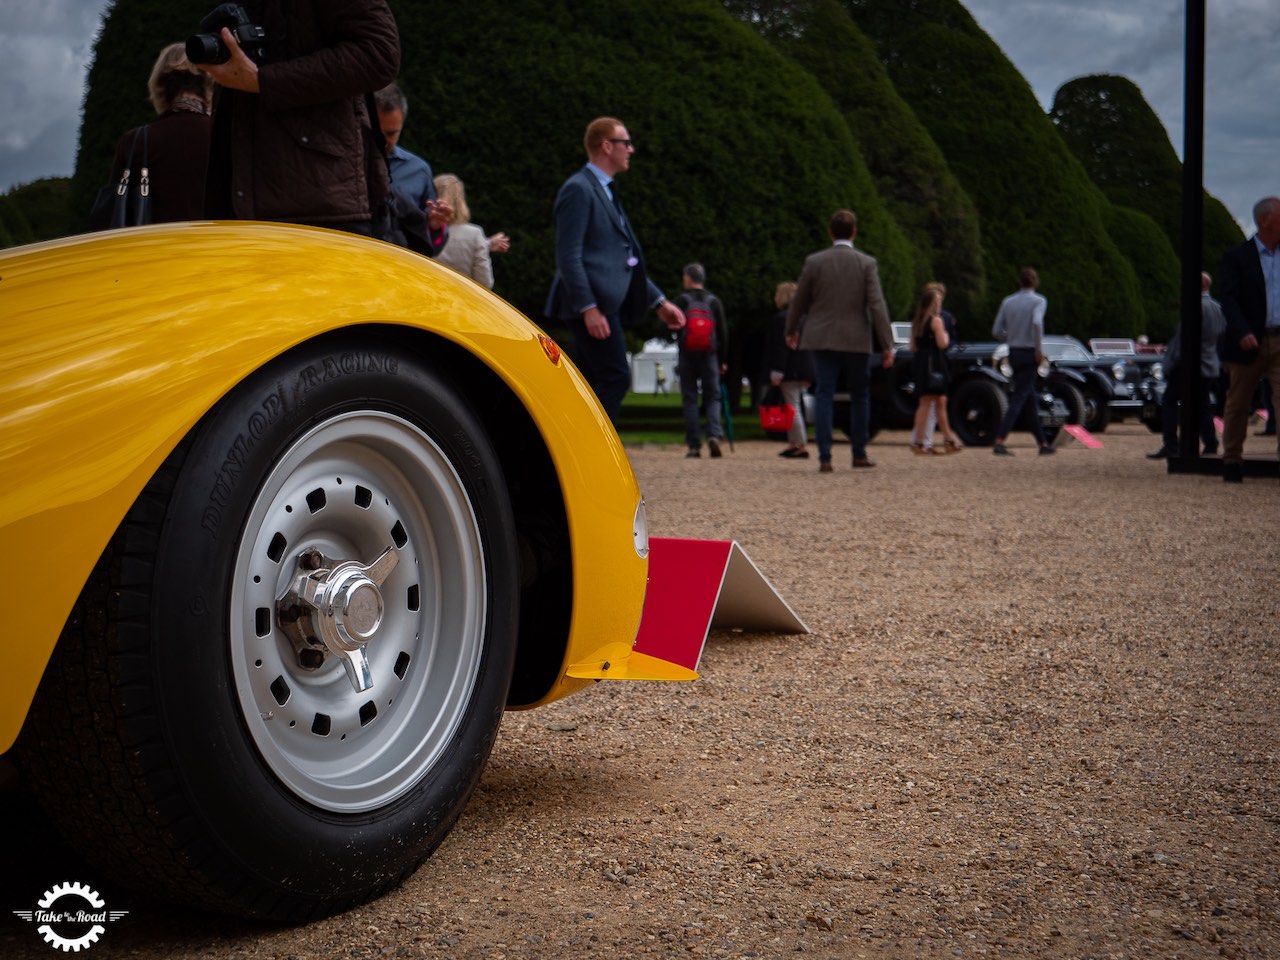 Concours of Elegance - Automotive Perfection at the Palace